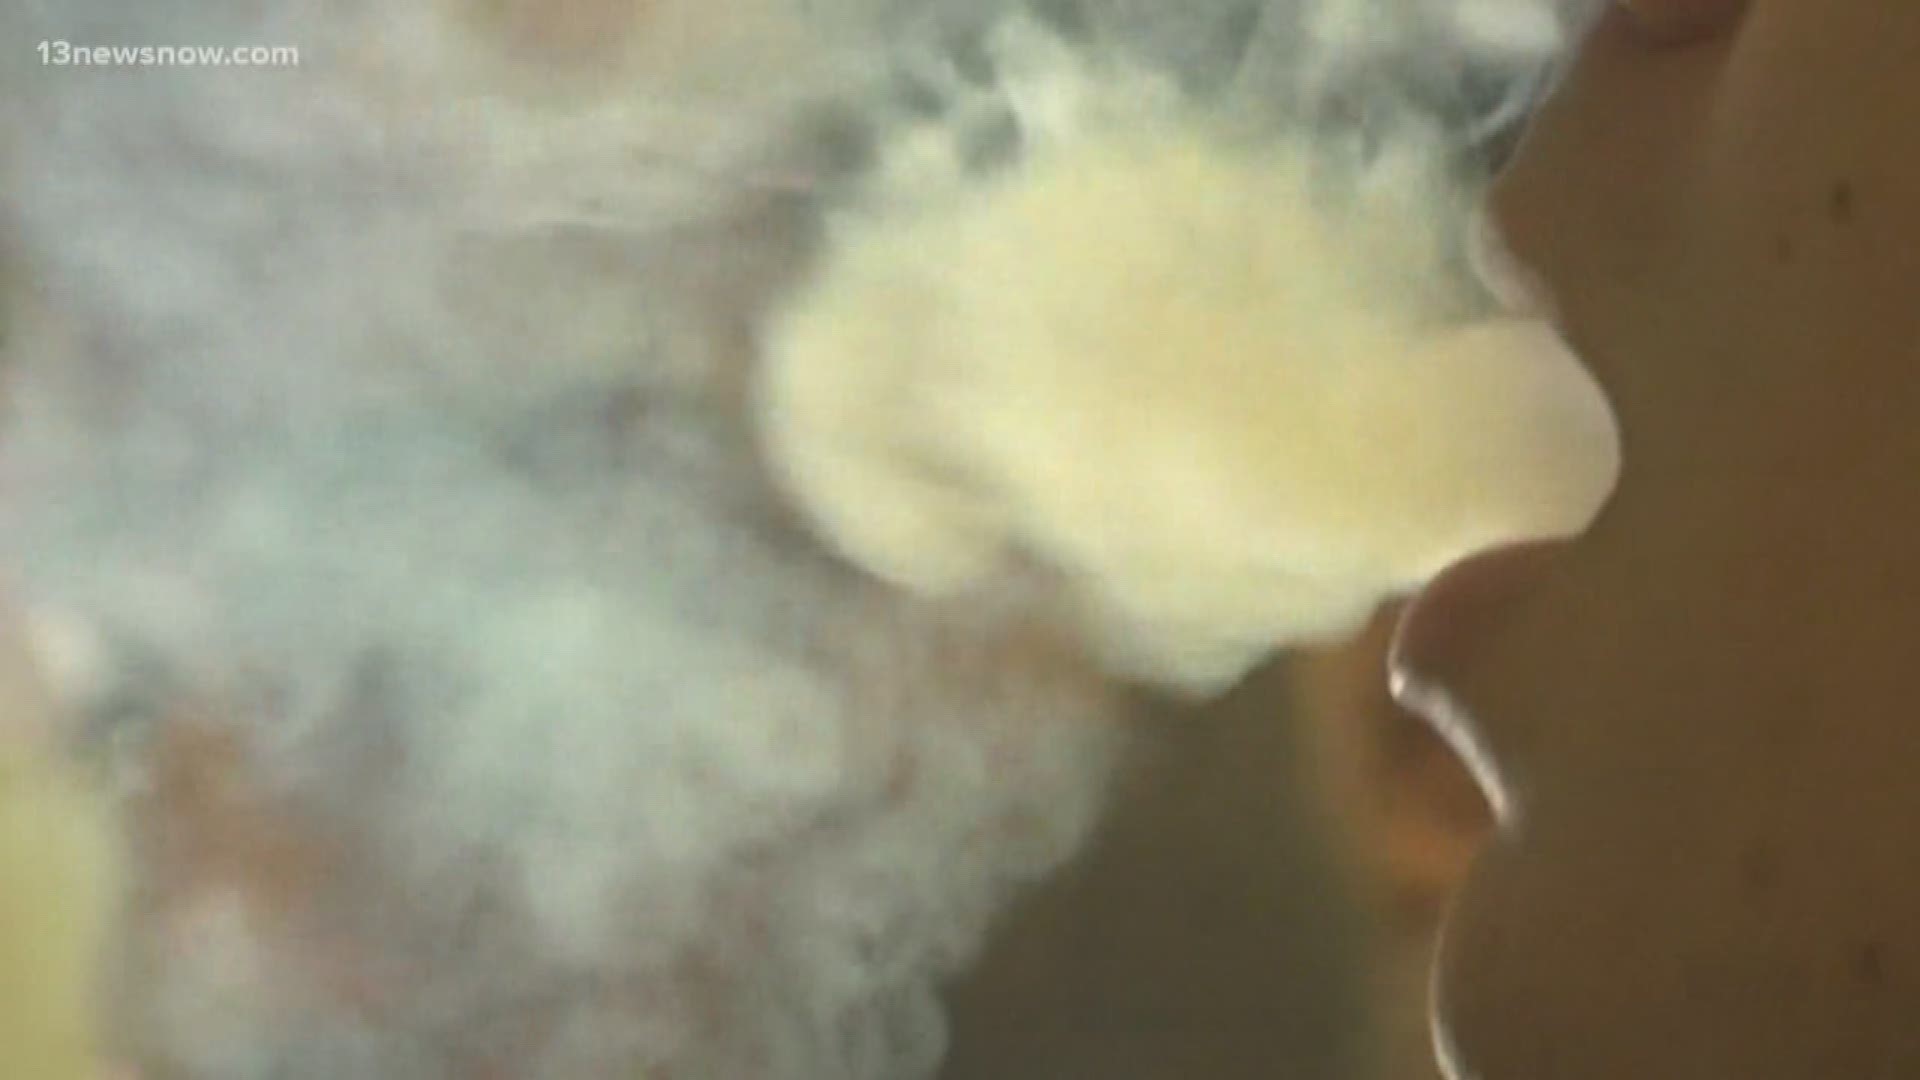 Nearly 13,000 people in the United States have gotten sick from vaping. The CDC said 26 people have died.